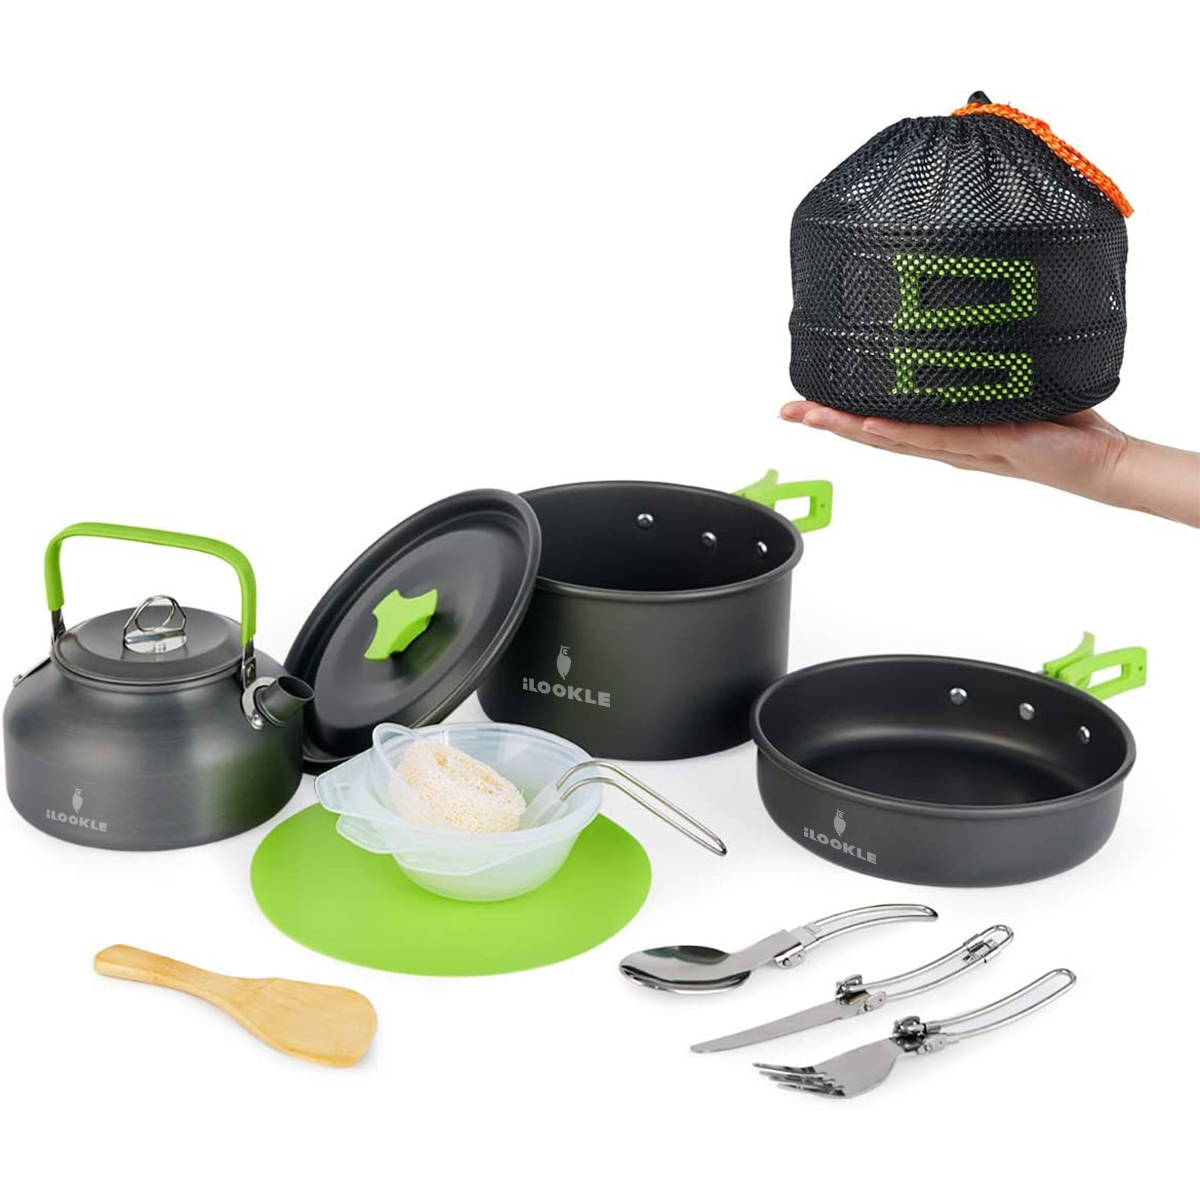 Portable Outside Camping Cookware Set ,12 Piece Camping Cooking Set Mess Kit with Pot Kettle Chopping Board Folding Tableware